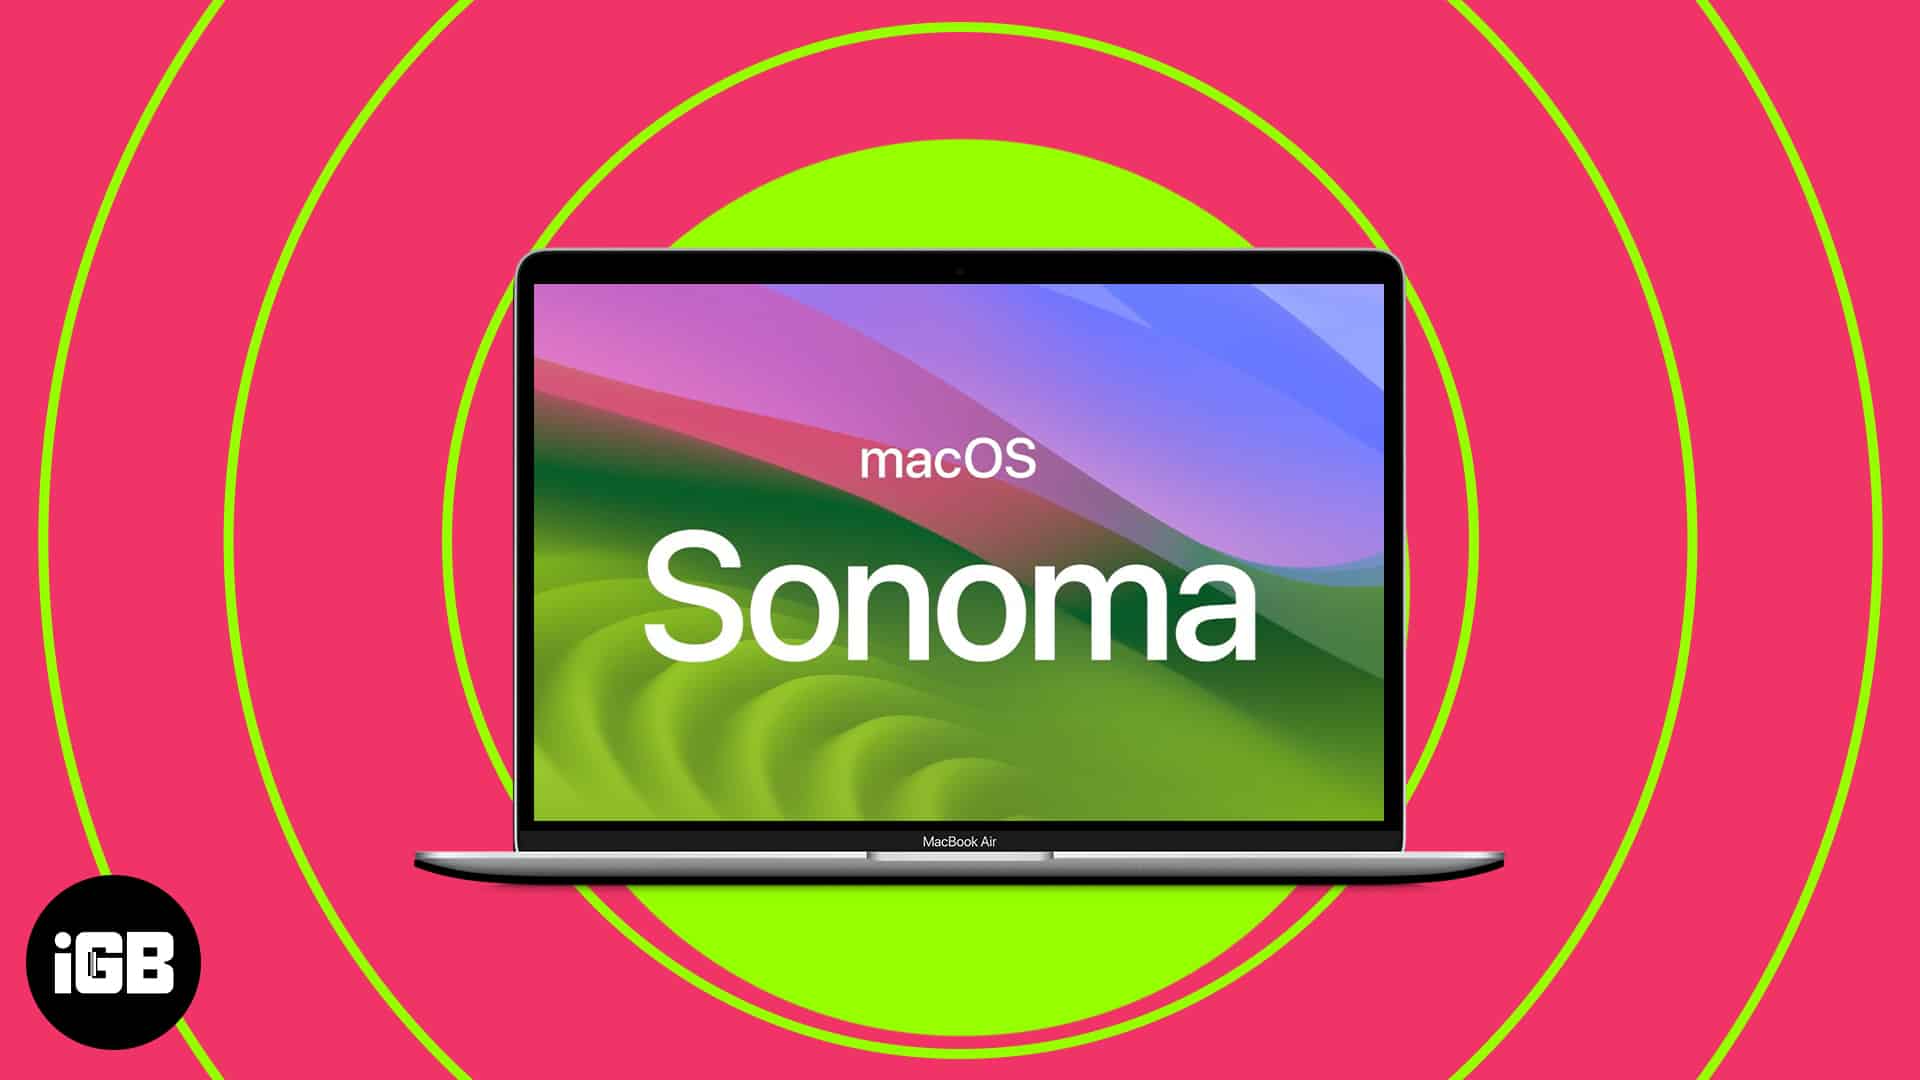 Download the official macOS Sonoma wallpapers here